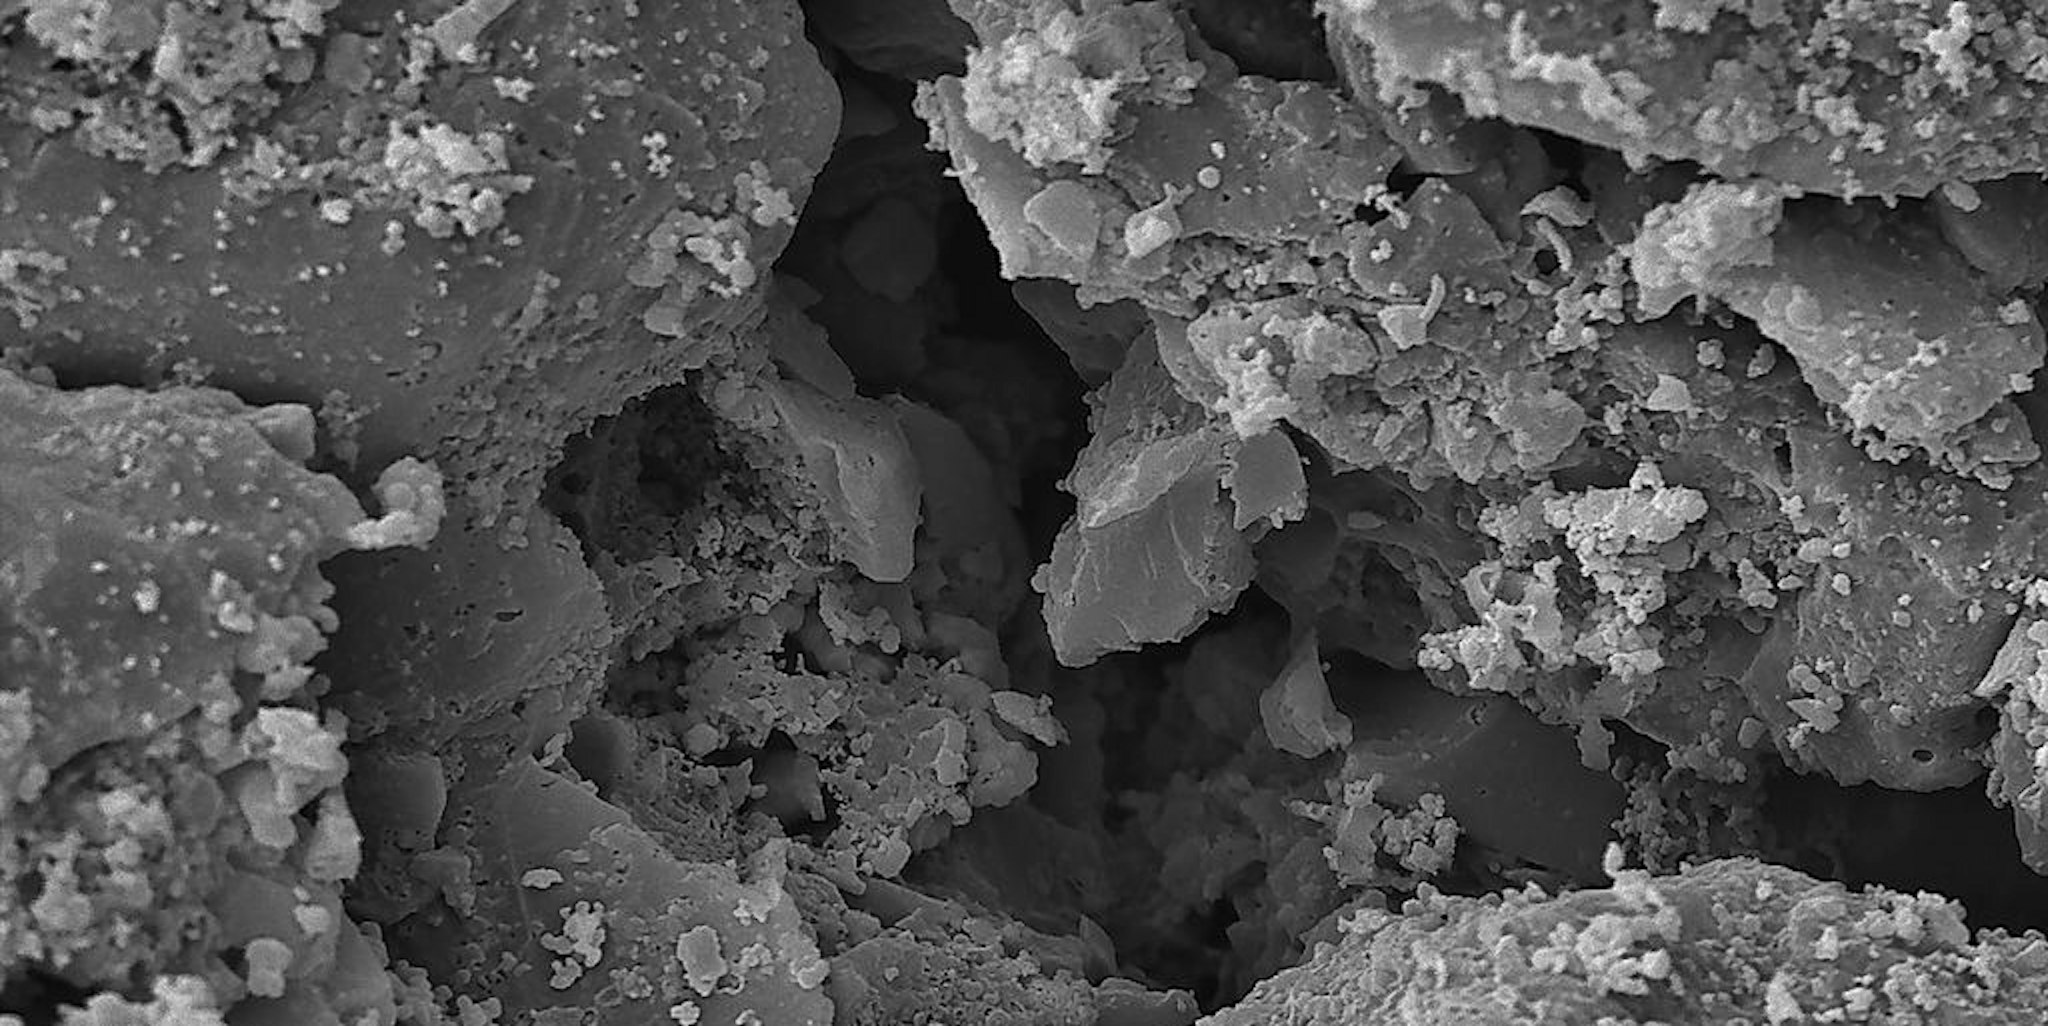 Activated charcoal up close